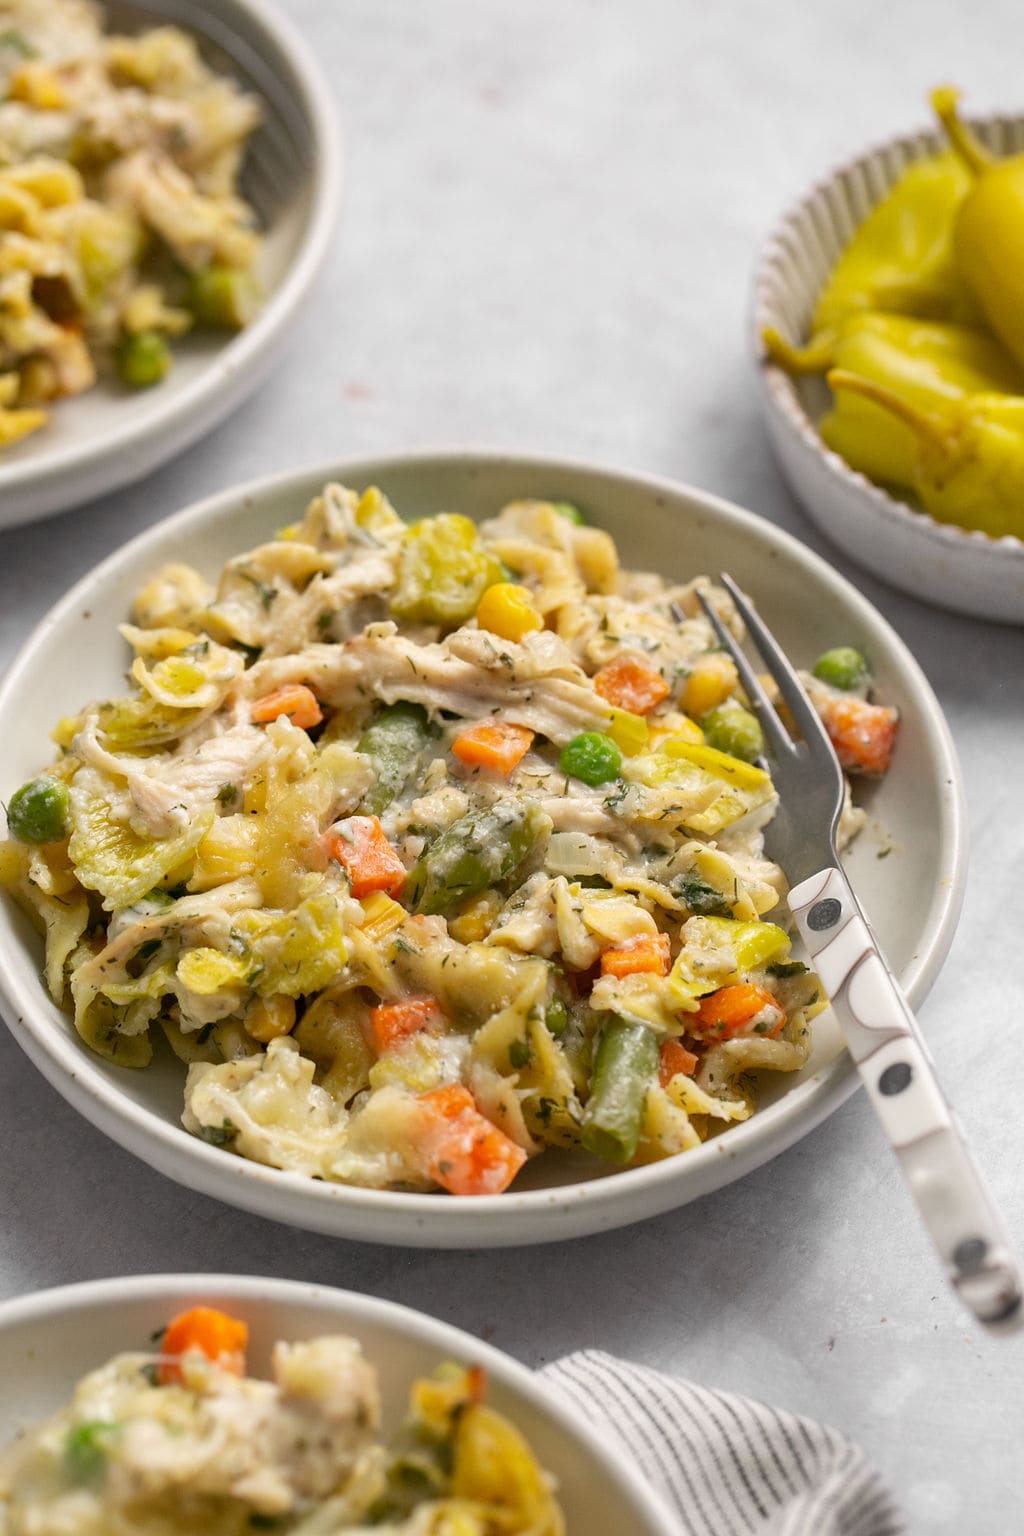 Bowl of noodles, vegetables and chicken casserole. 